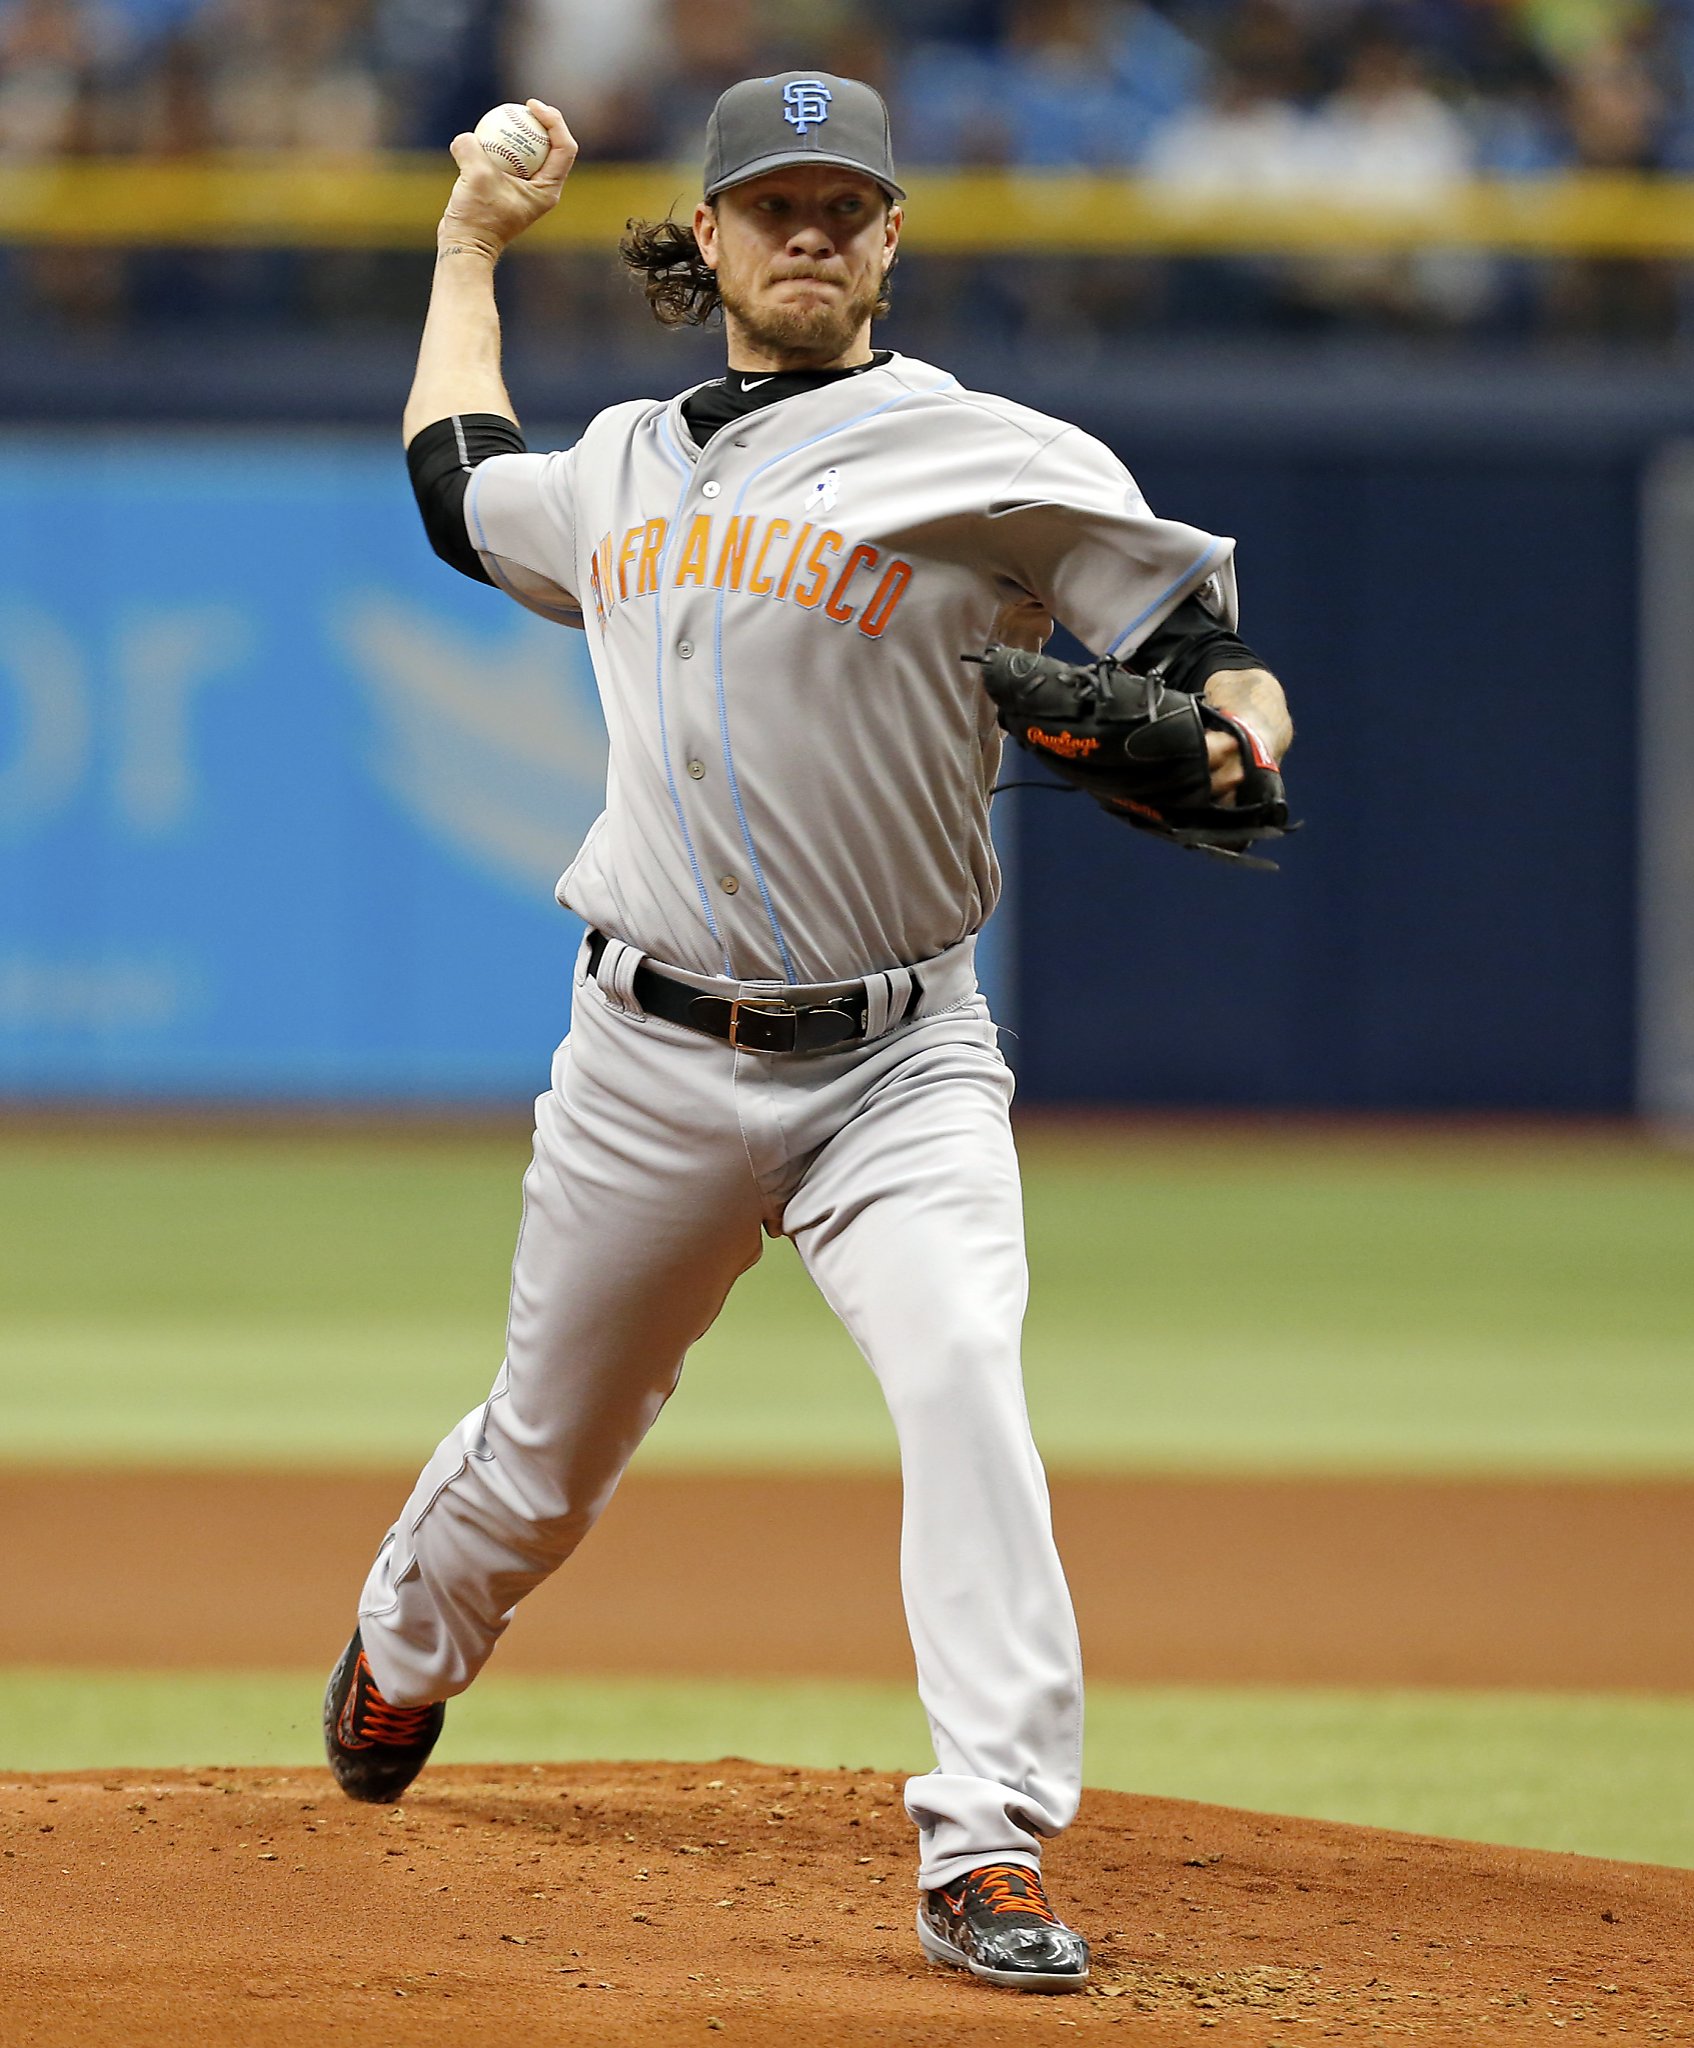 Jake Peavy's Second Act